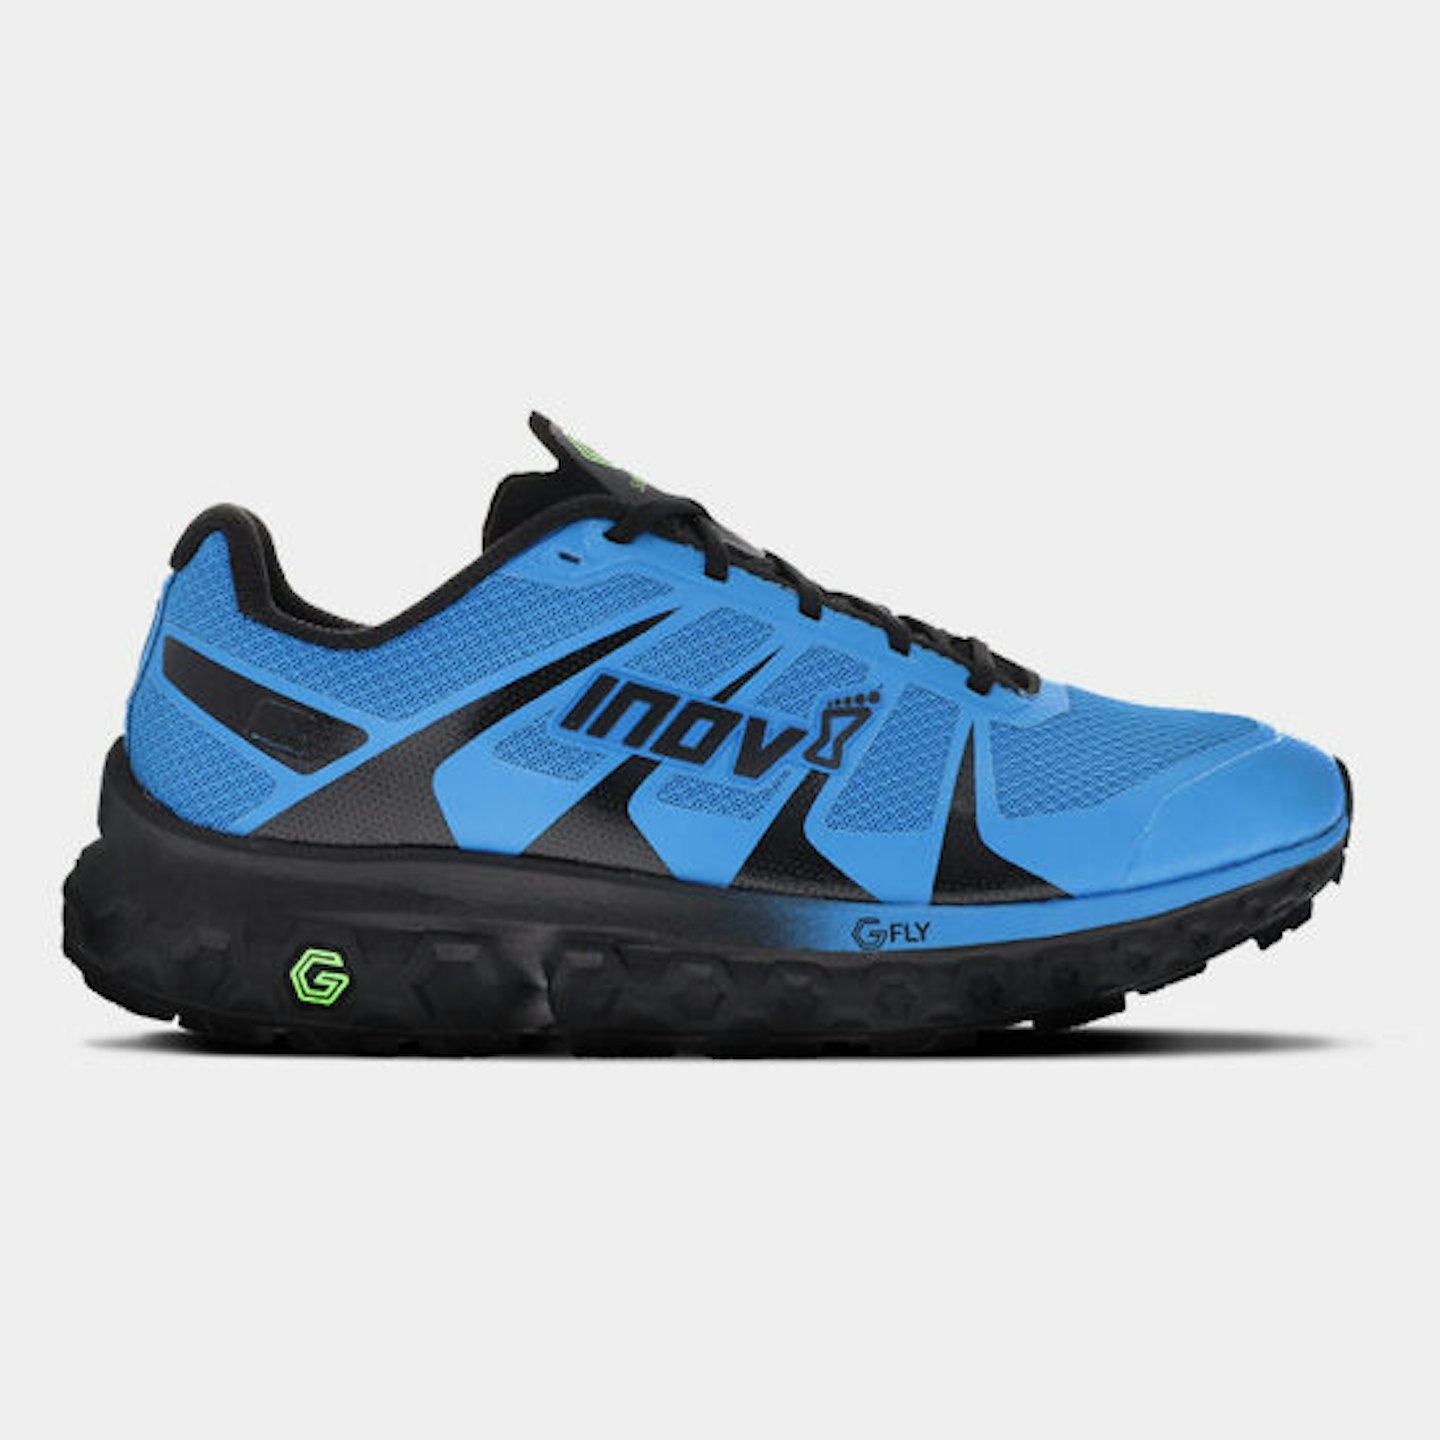 Best hard pack trail running shoes